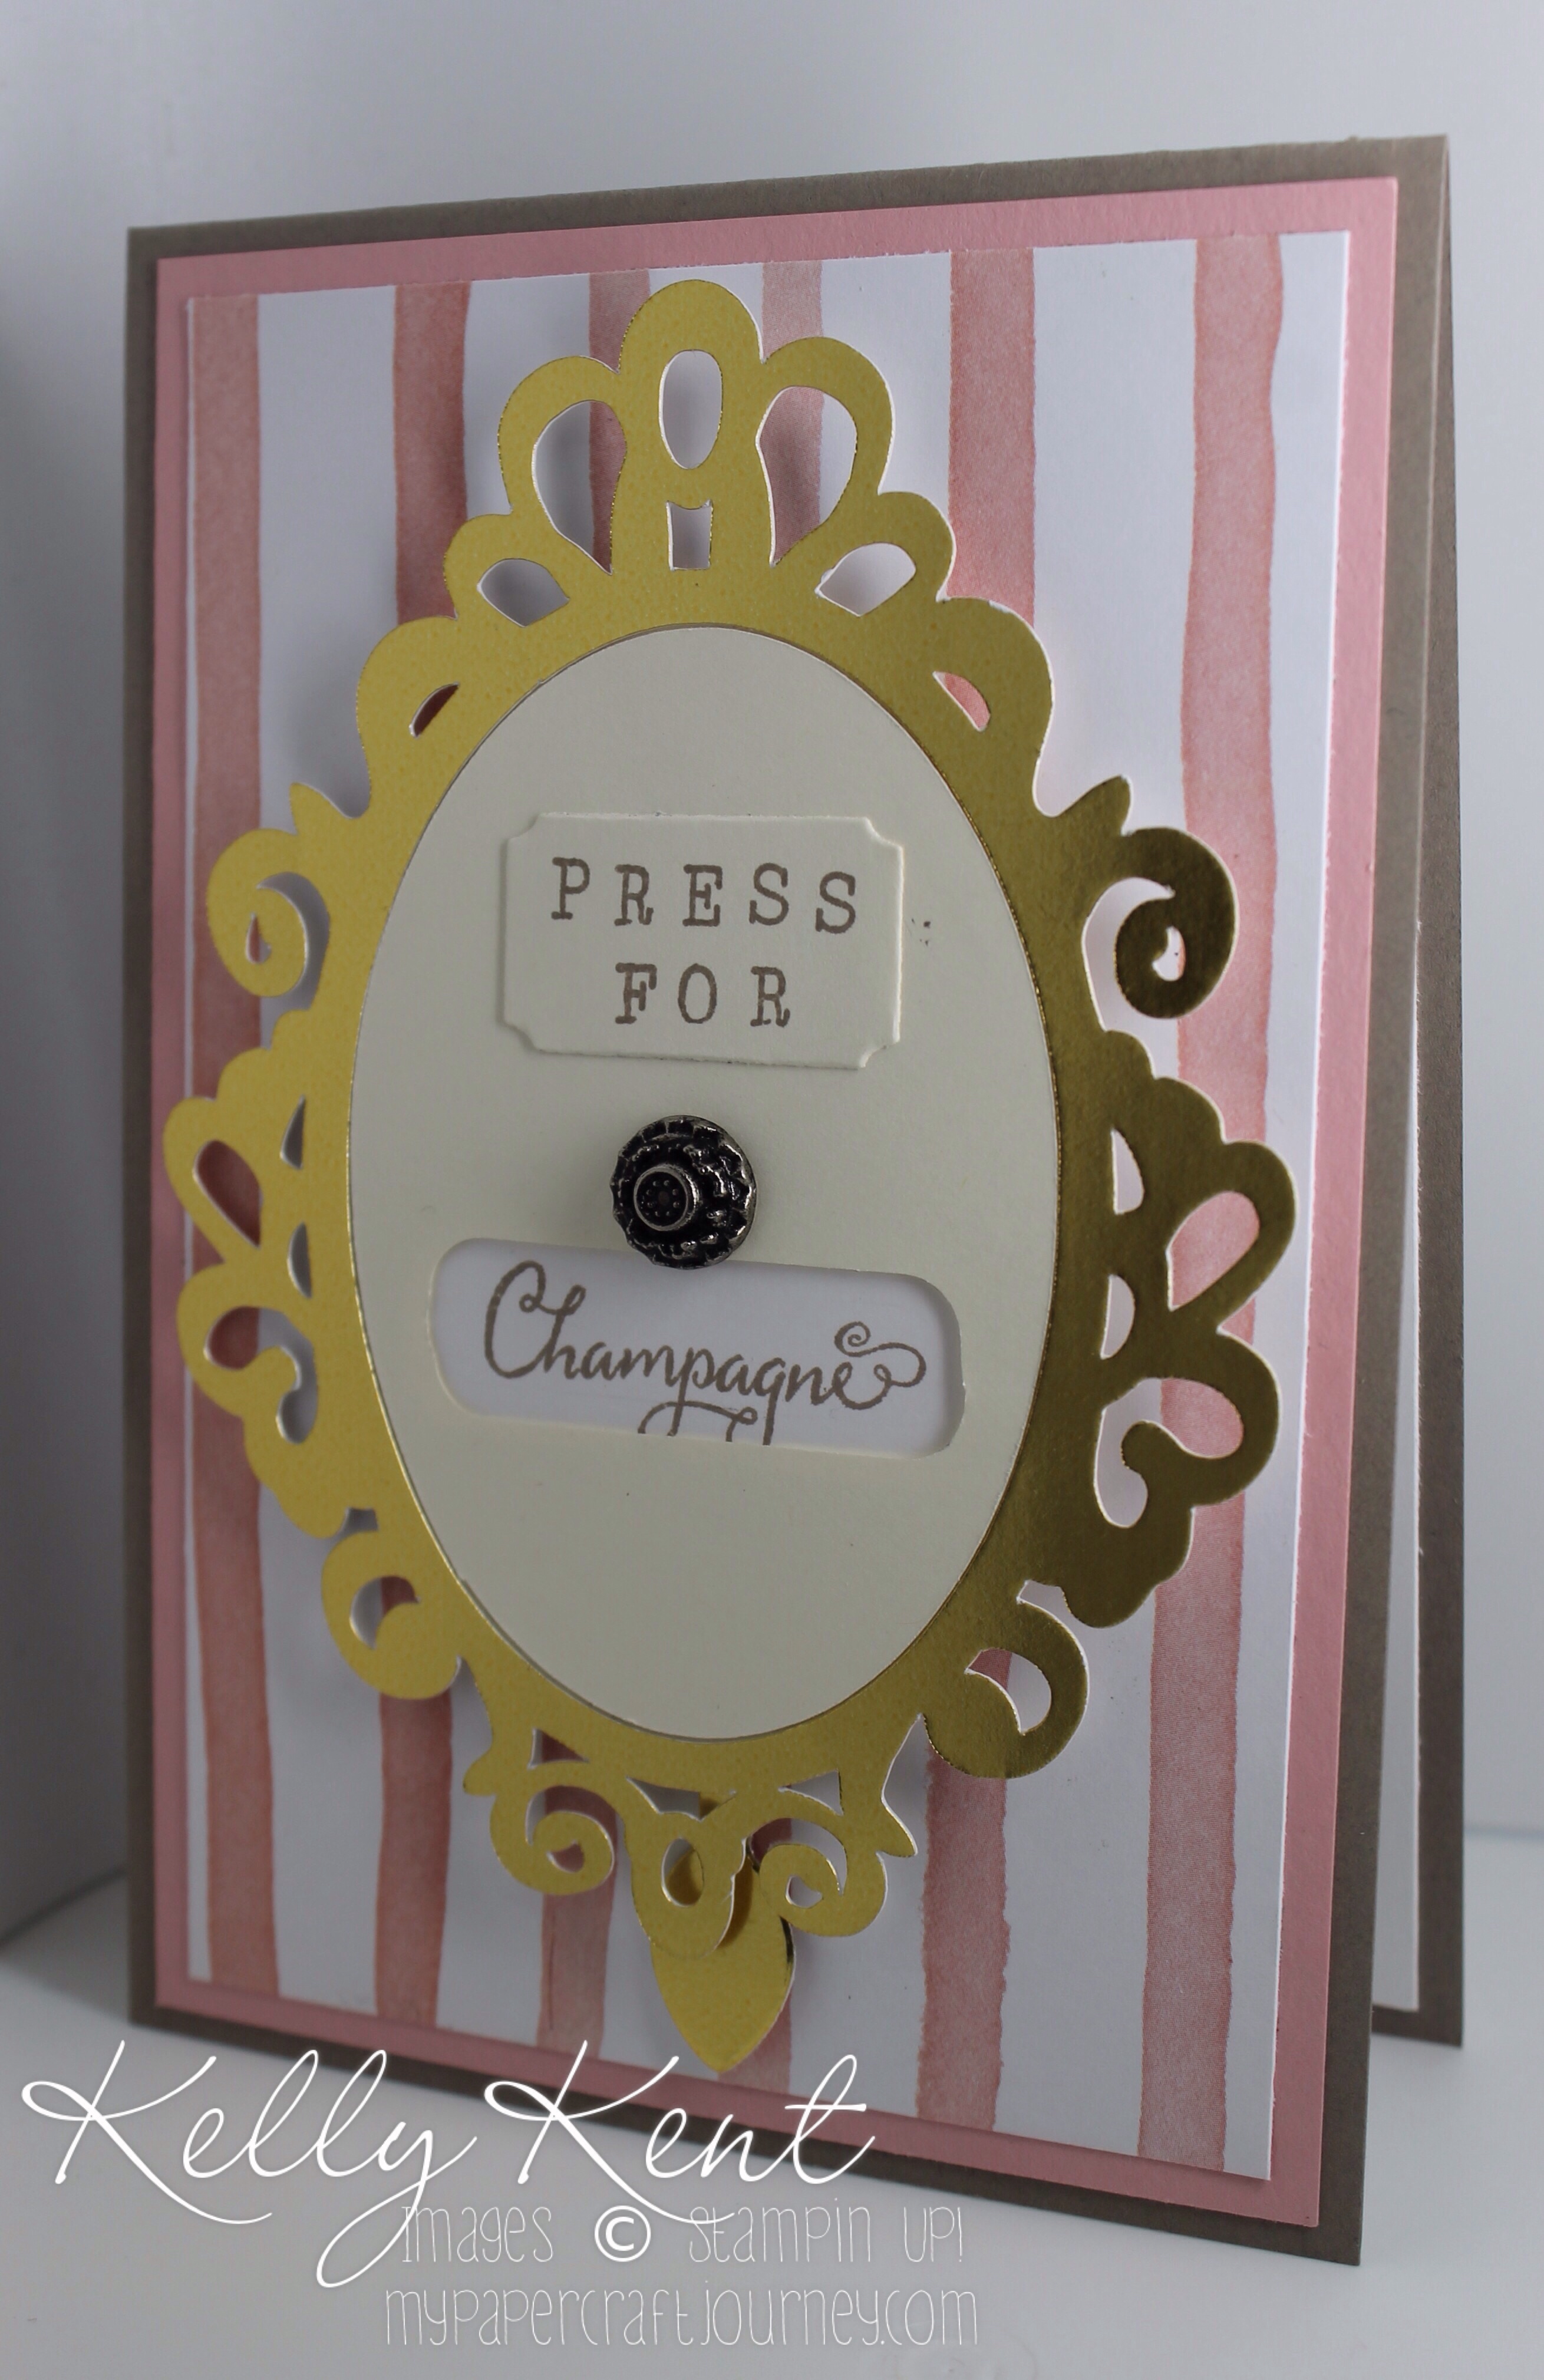 Press for Champagne Rotating Birthday Card. Balloon Builders stamp set & Birthday Bouquet DSP. Kelly Kent - mypapercraftjourney.com.